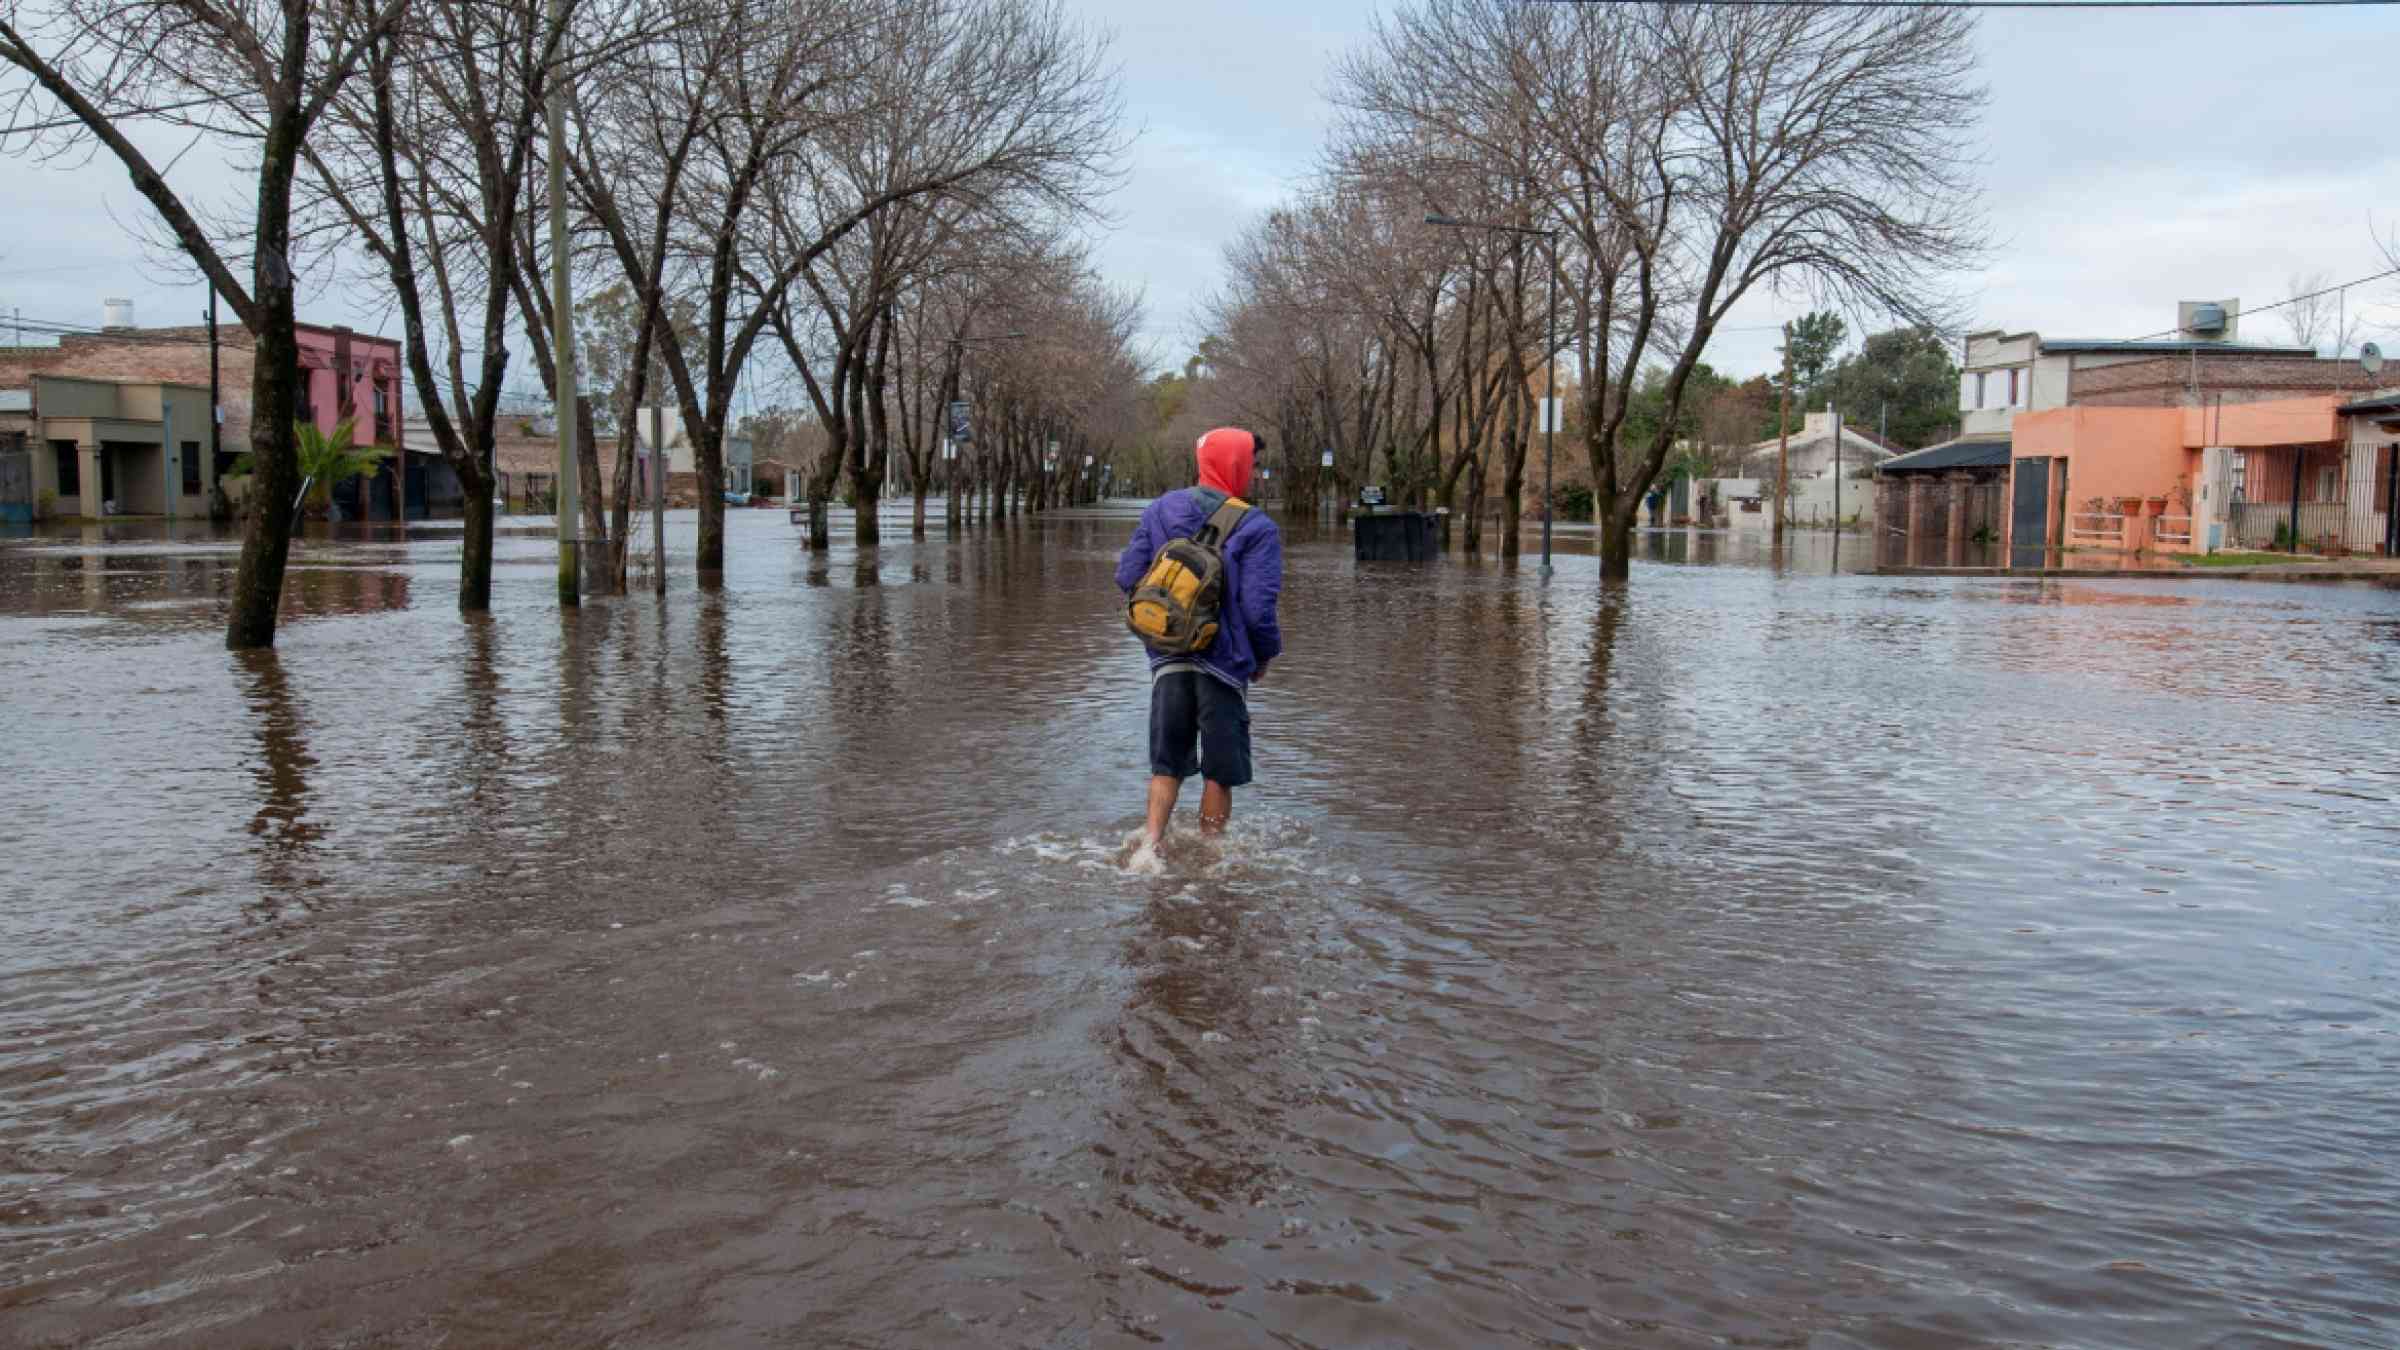 A man wades through the flood in Buenos Aires, Argentina